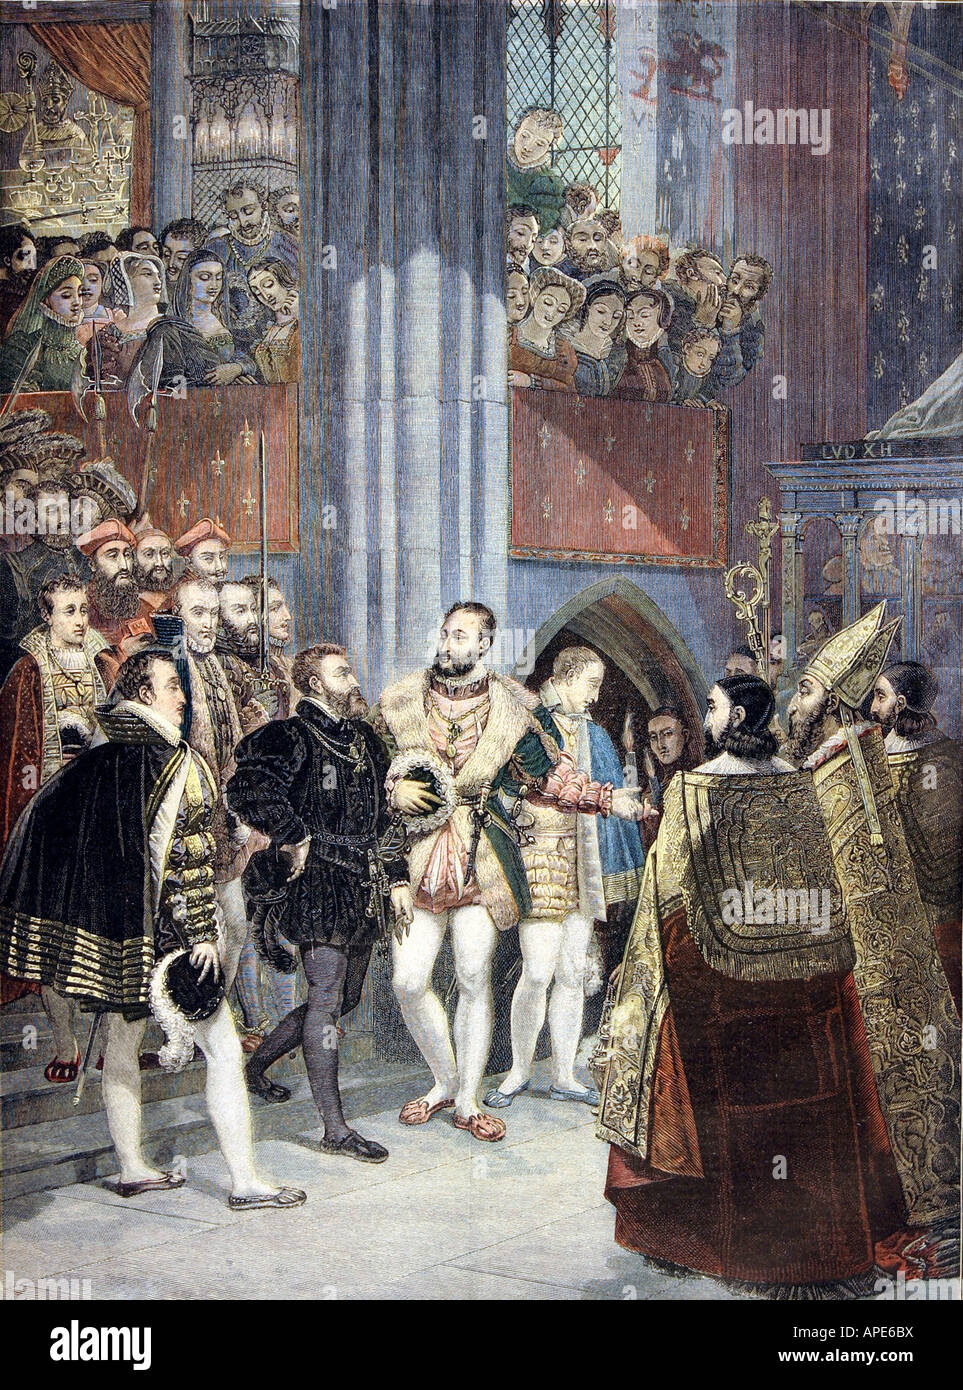 press/media, magazines, 'Le Petit Journal', Paris, 4. volume, number 146, illustrated supplement, Saturday 9 September 1893, illustration, 'Meeting of Francis I and Charles V in Saint Denis', , Stock Photo